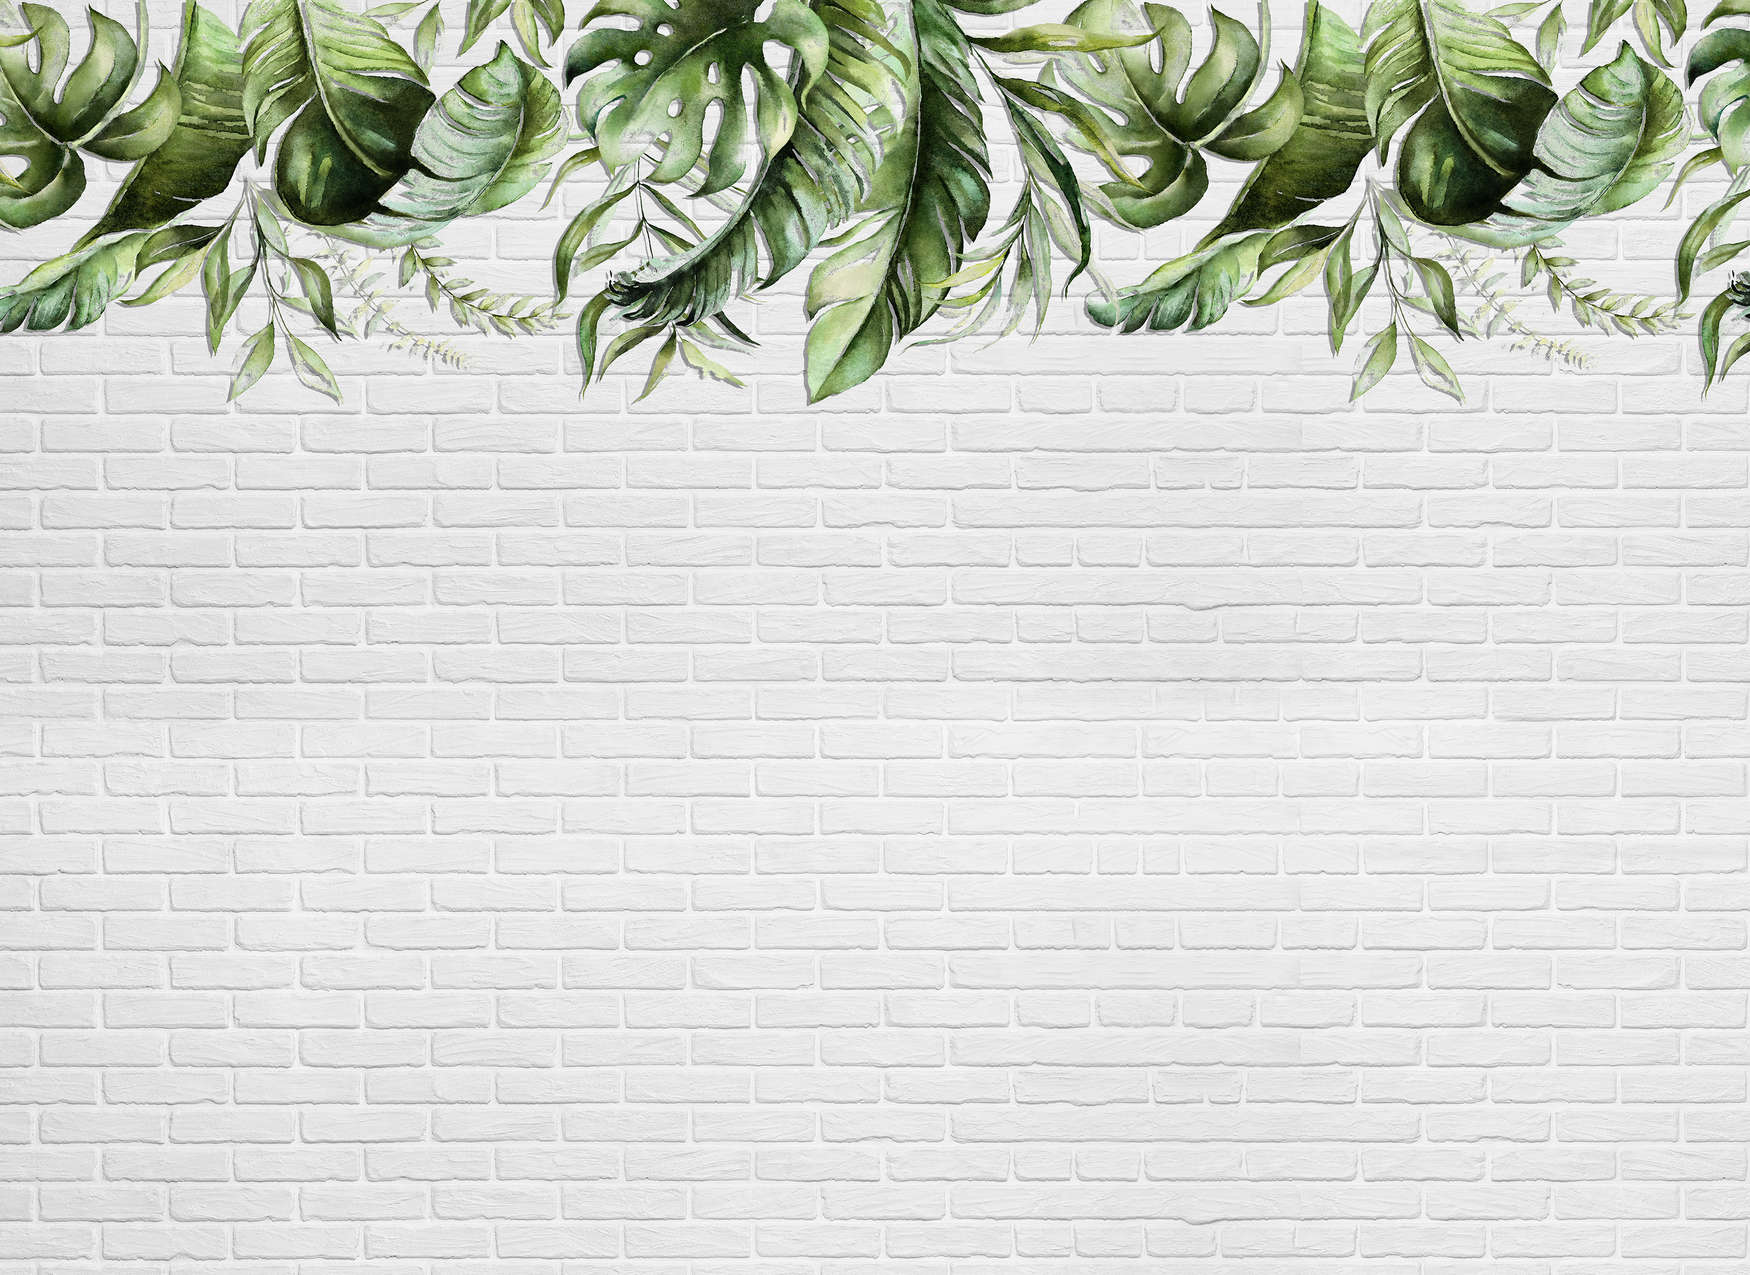             Photo wallpaper with small leaf tendrils on a stone wall - Green, White
        